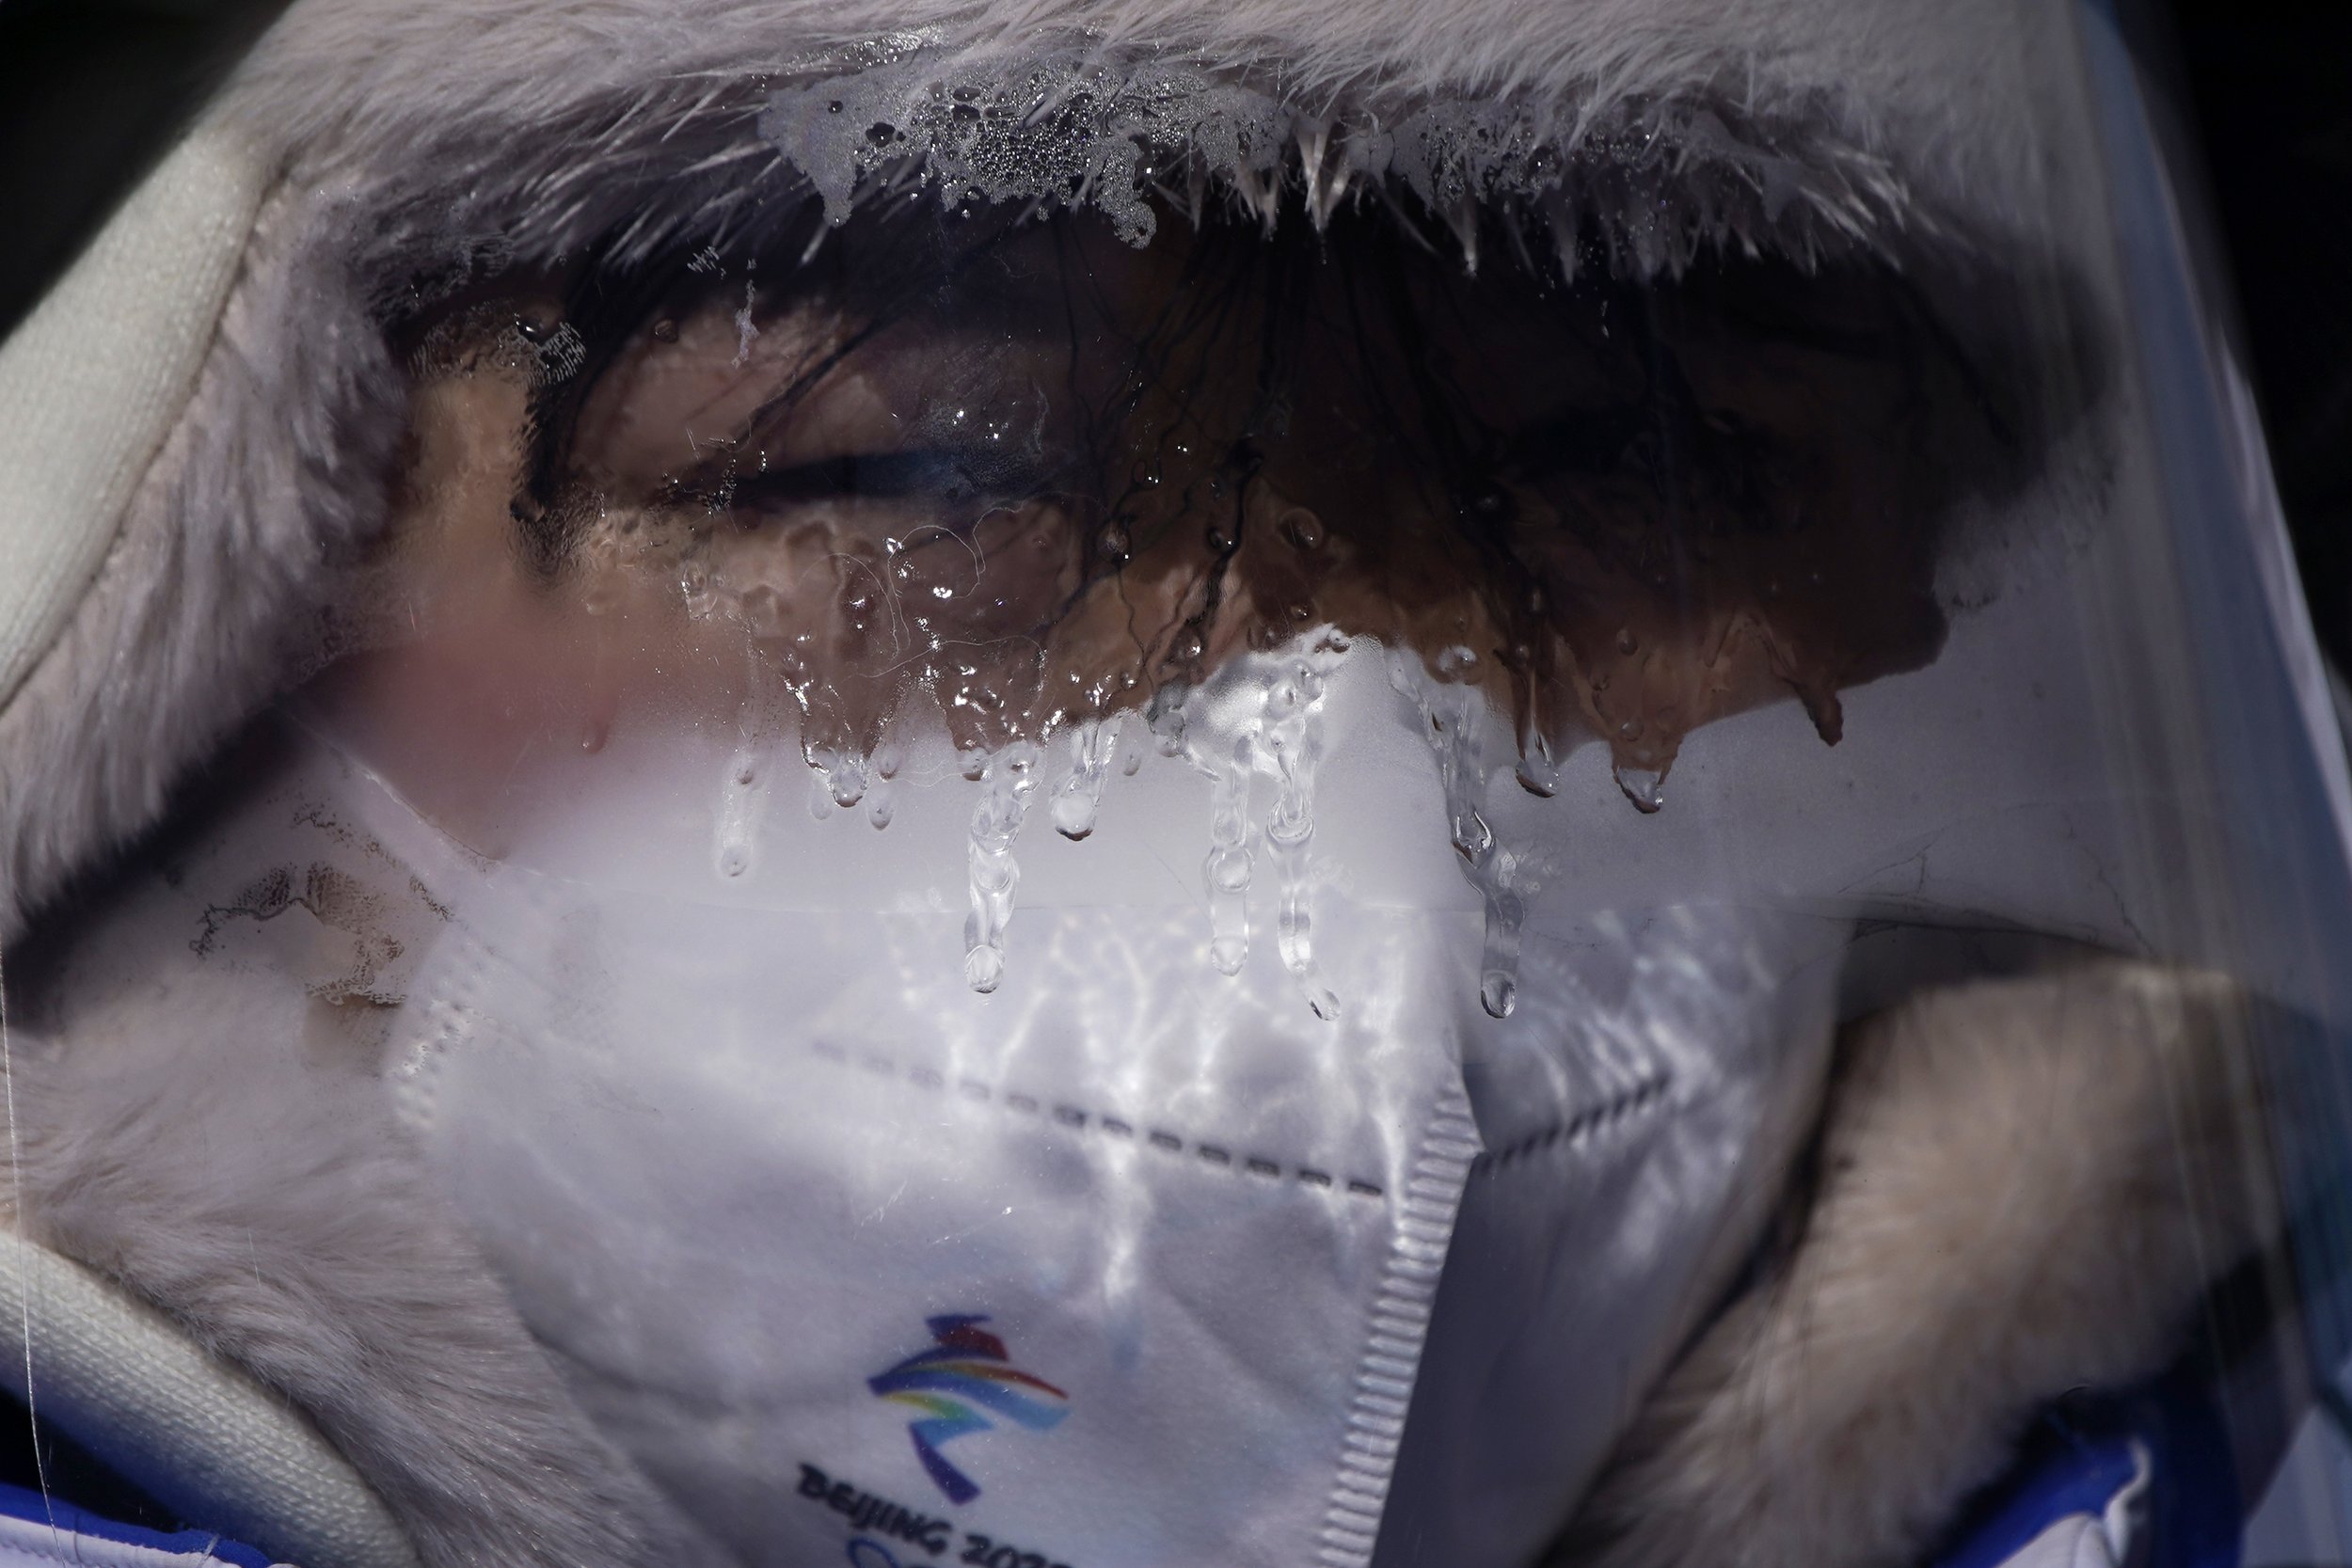  Ice forms on the face shield of a volunteer during a cross-country skiing practice before the 2022 Winter Olympics, Wednesday, Feb. 2, 2022, in Zhangjiakou, China. (AP Photo/John Locher) 